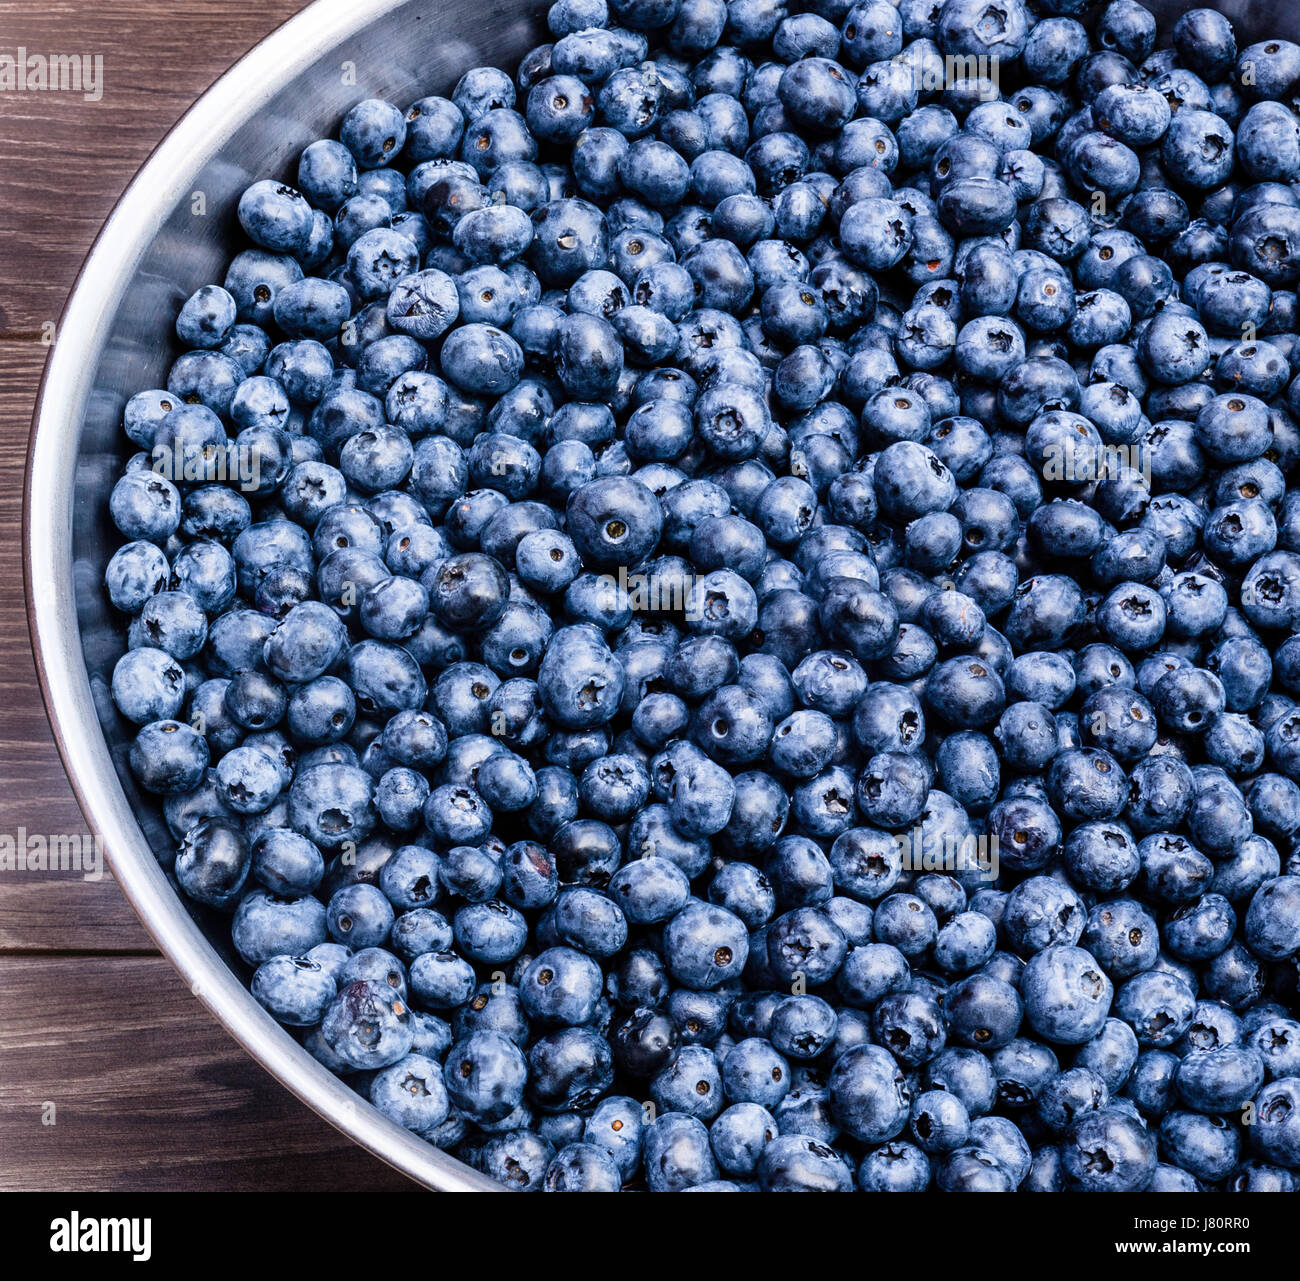 Fresh wild blueberries in a stainless steel bowl Stock Photo